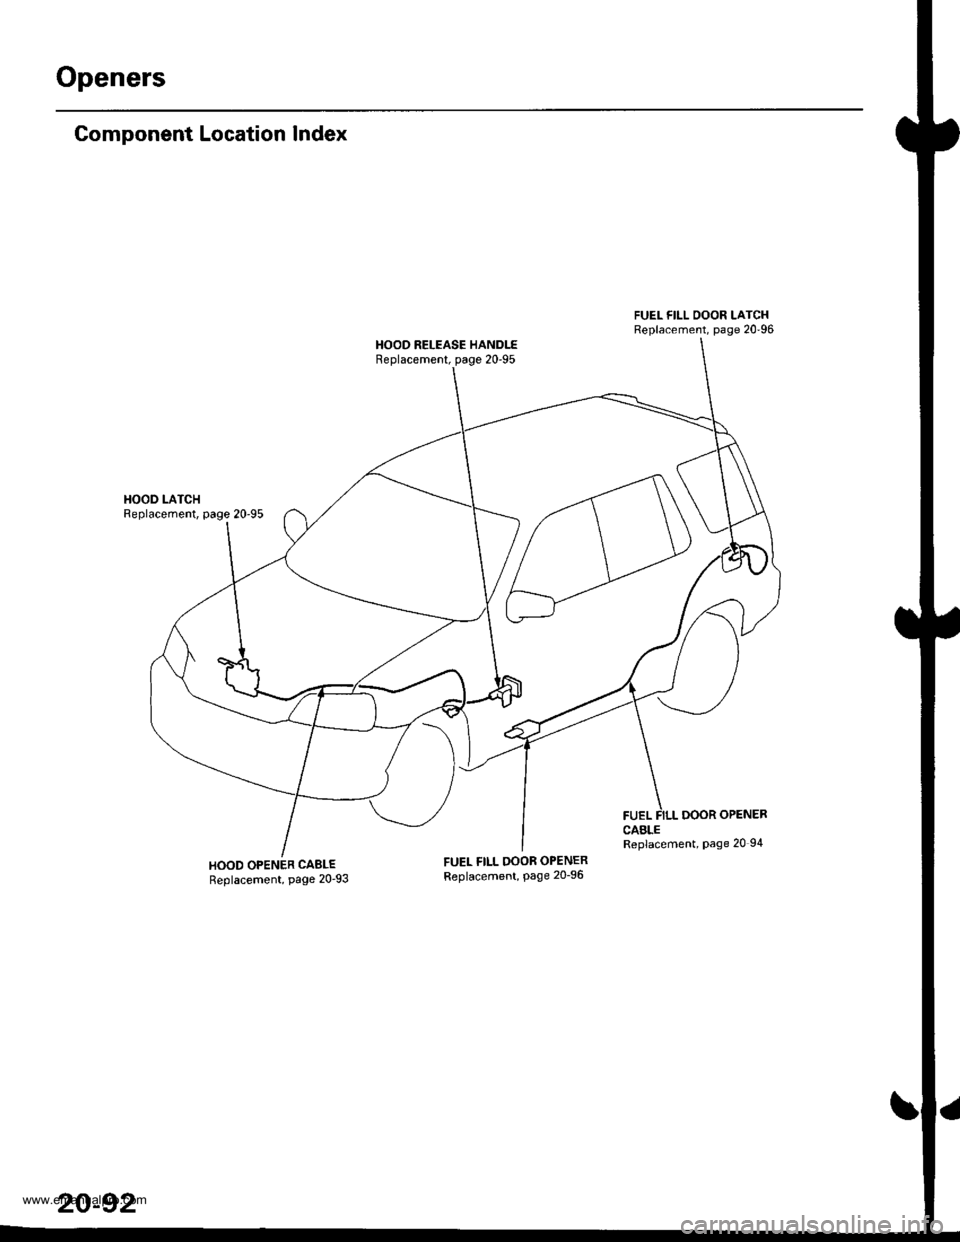 HONDA CR-V 1997 RD1-RD3 / 1.G Workshop Manual 
Openers
Component Location Index
HOOD LATCHReplacement, page 2095
HOOD OPENER CABLEReplacement, page 2093
FUEL FILL OOOR LATCHReplacement, page 2096
HOOD RELEASE HANDLEReplacement, page 2095
FUEL